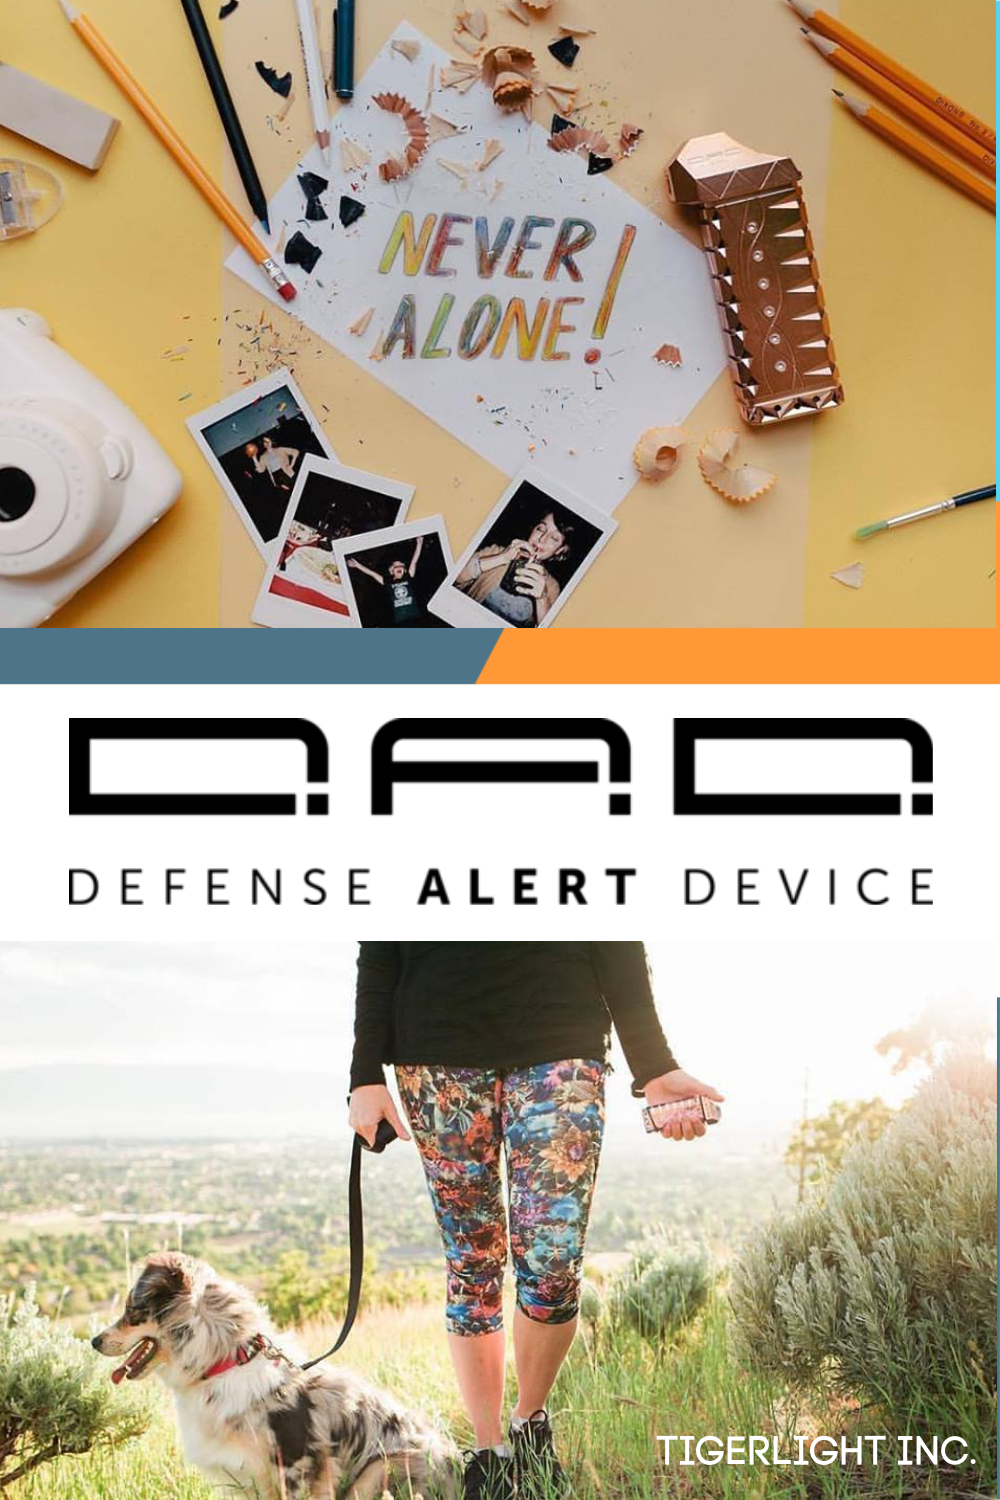 The D.A.D.Â® (Defense Alert Device) is the first non-lethal personal safety device with smart technology. Each device is equipped with Bluetooth to send an emergency alert via your cell phone. #Tigerlight #BeBold #NeverAlone